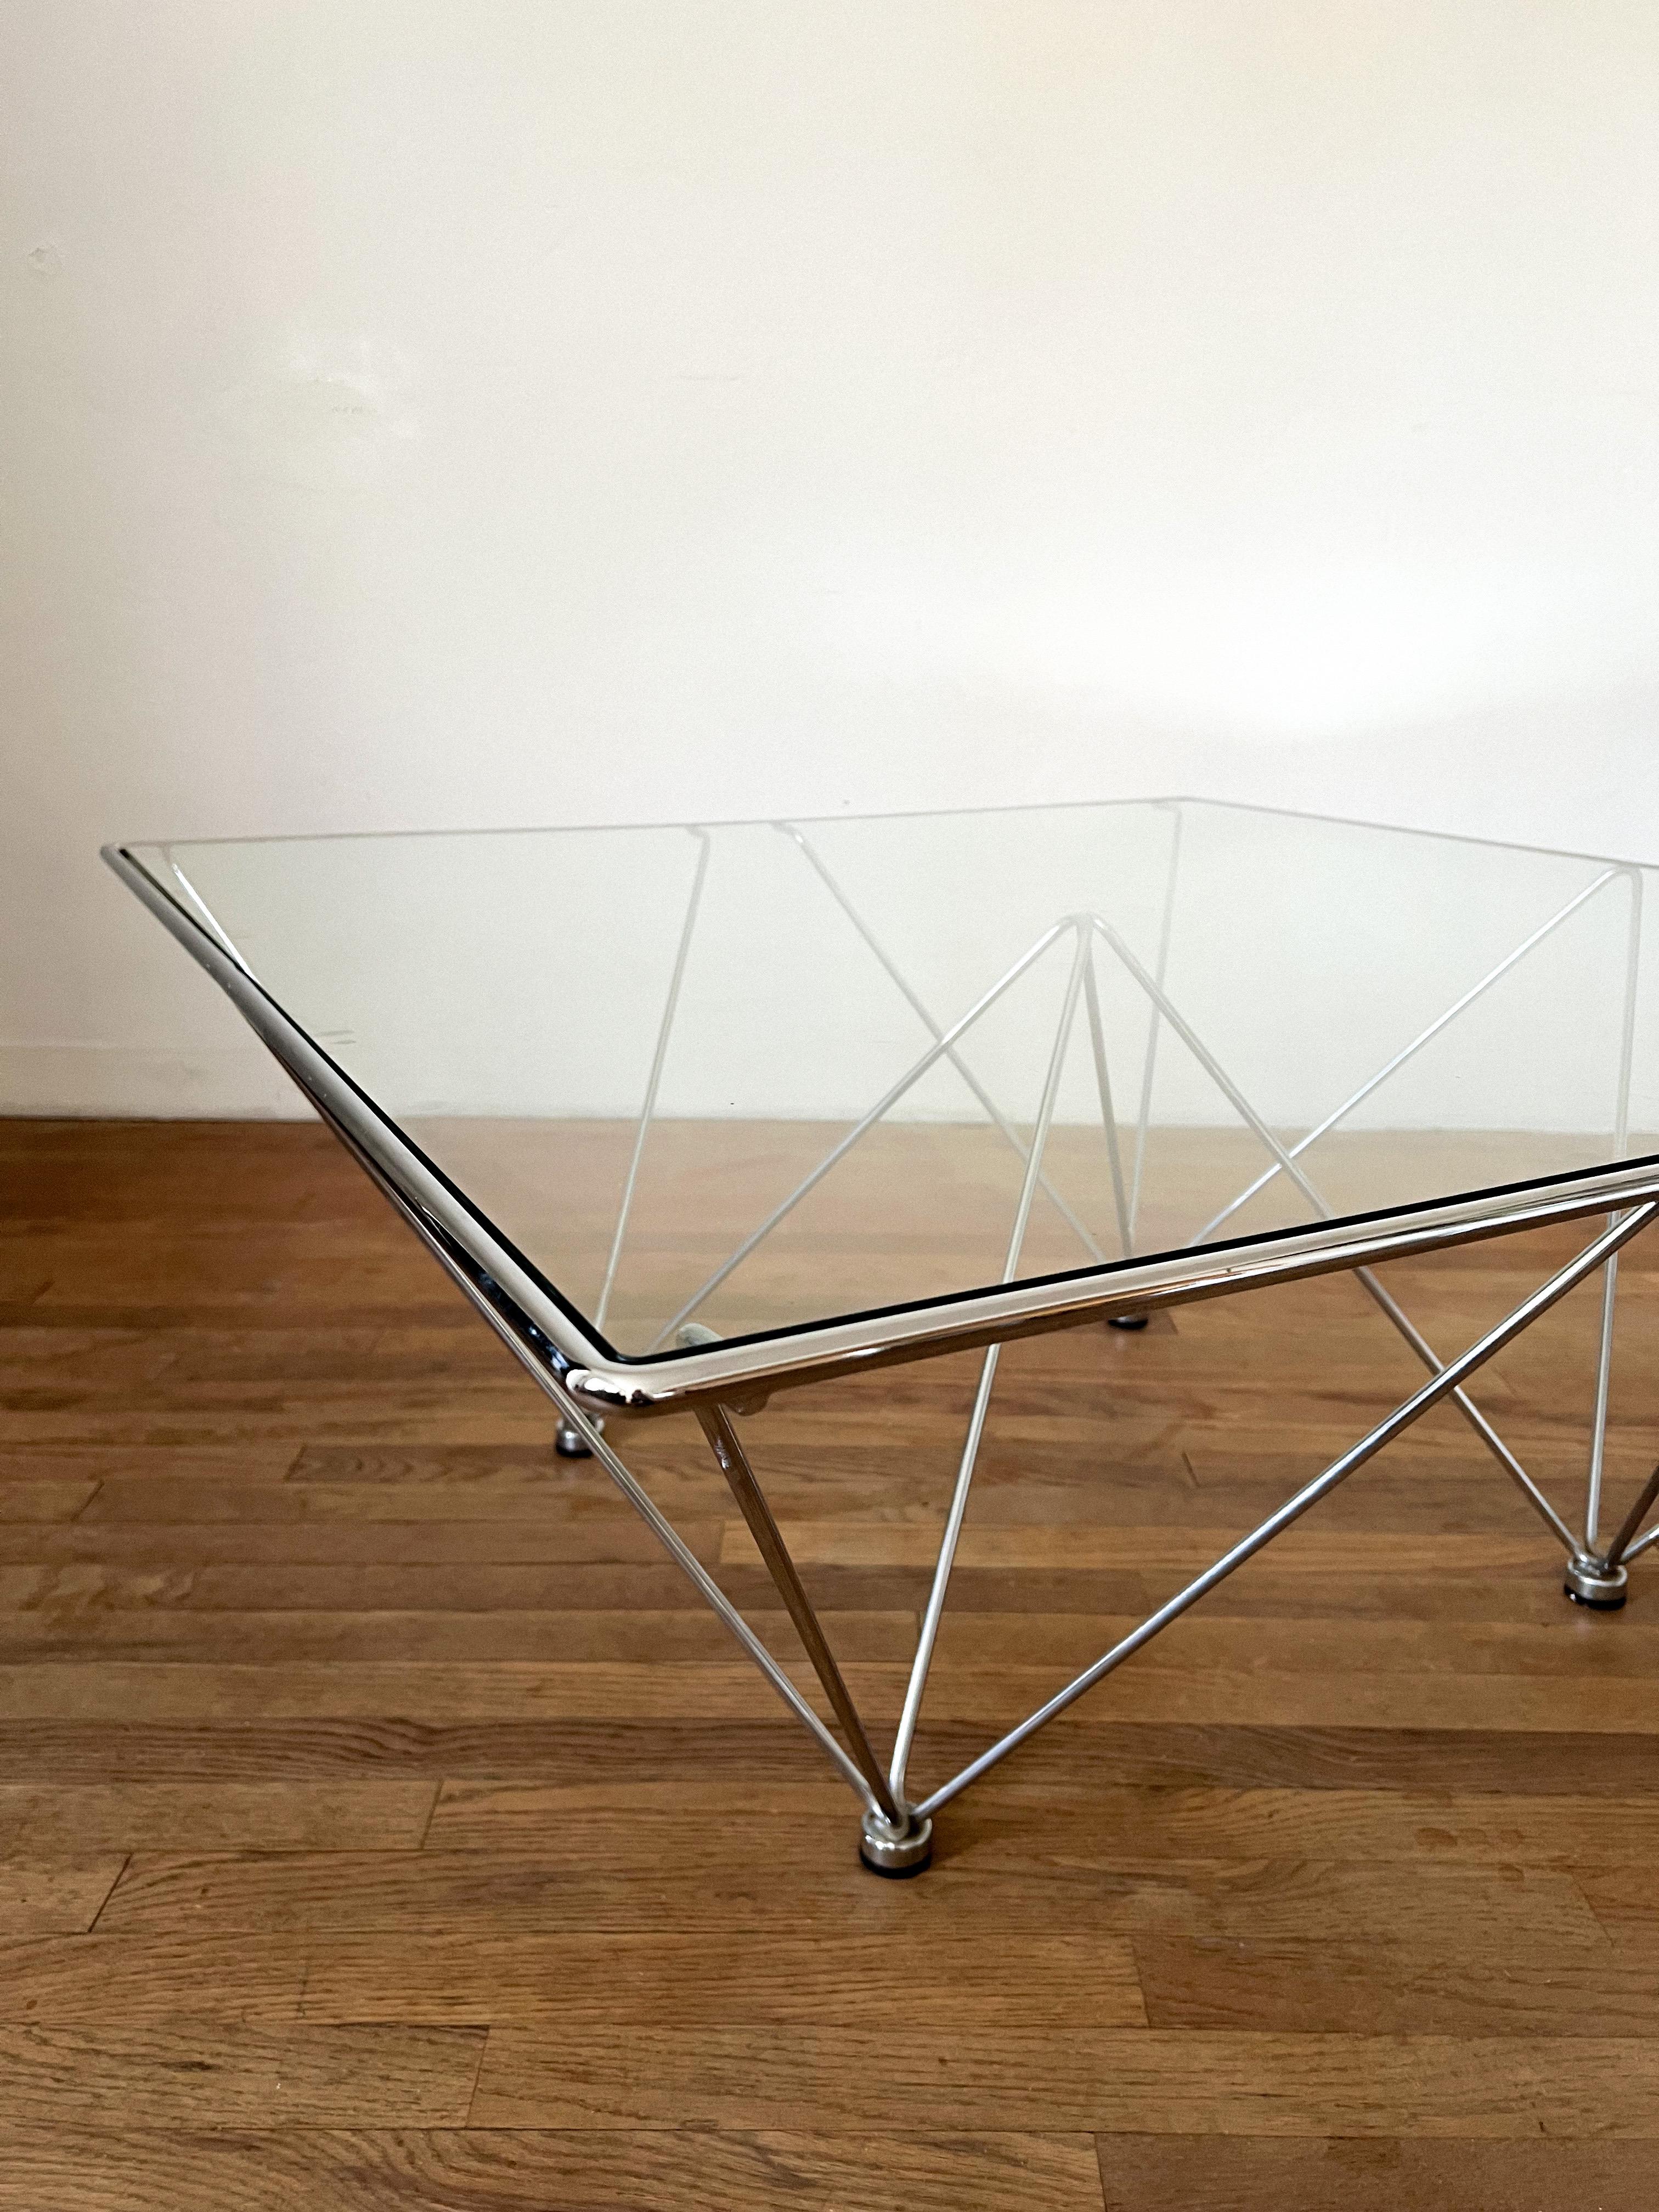 Late 20th Century 1980s Sculptural “Alanda” Coffee Table in the Style of Paolo Piva for B&b Italia For Sale